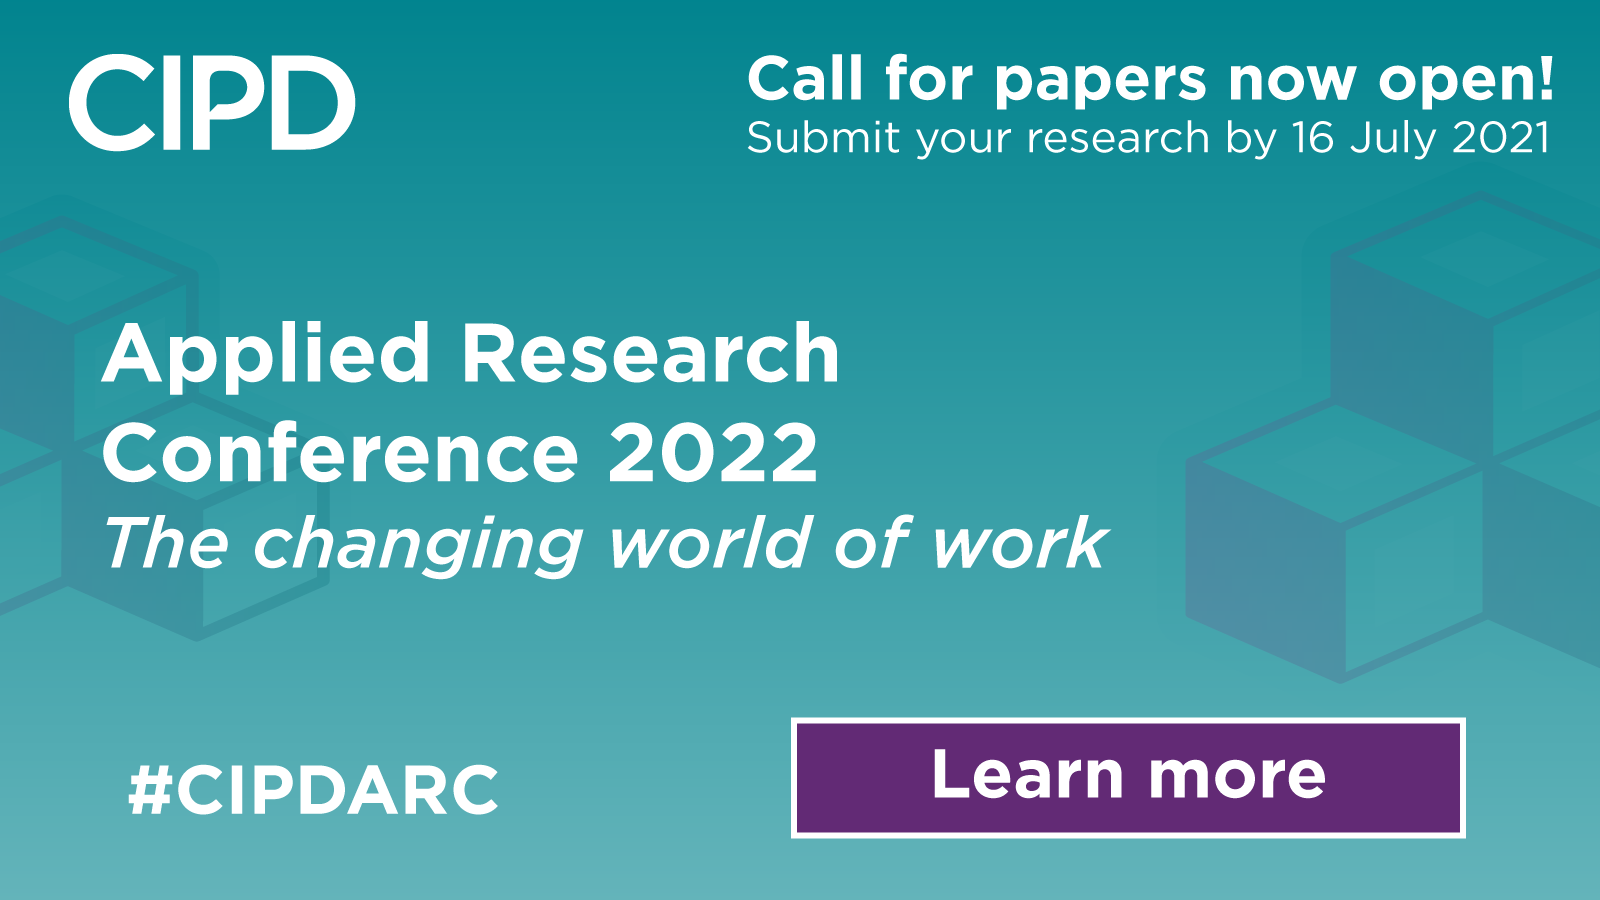 The banner for the ARC 2022 conference